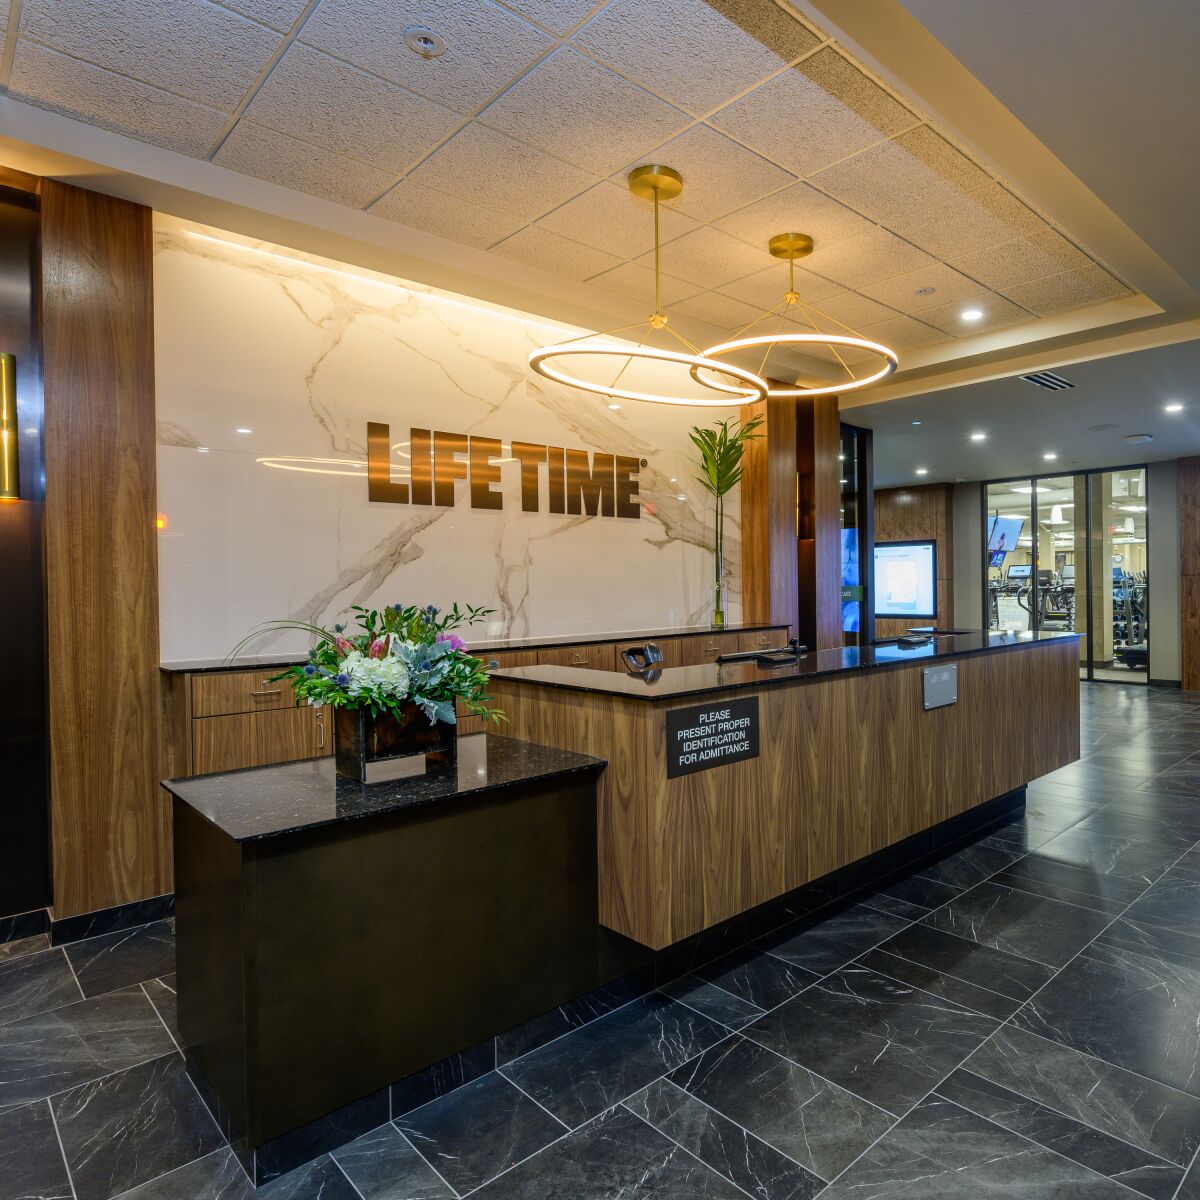 The front check-in desk welcomes guests to Life Time La Jolla.